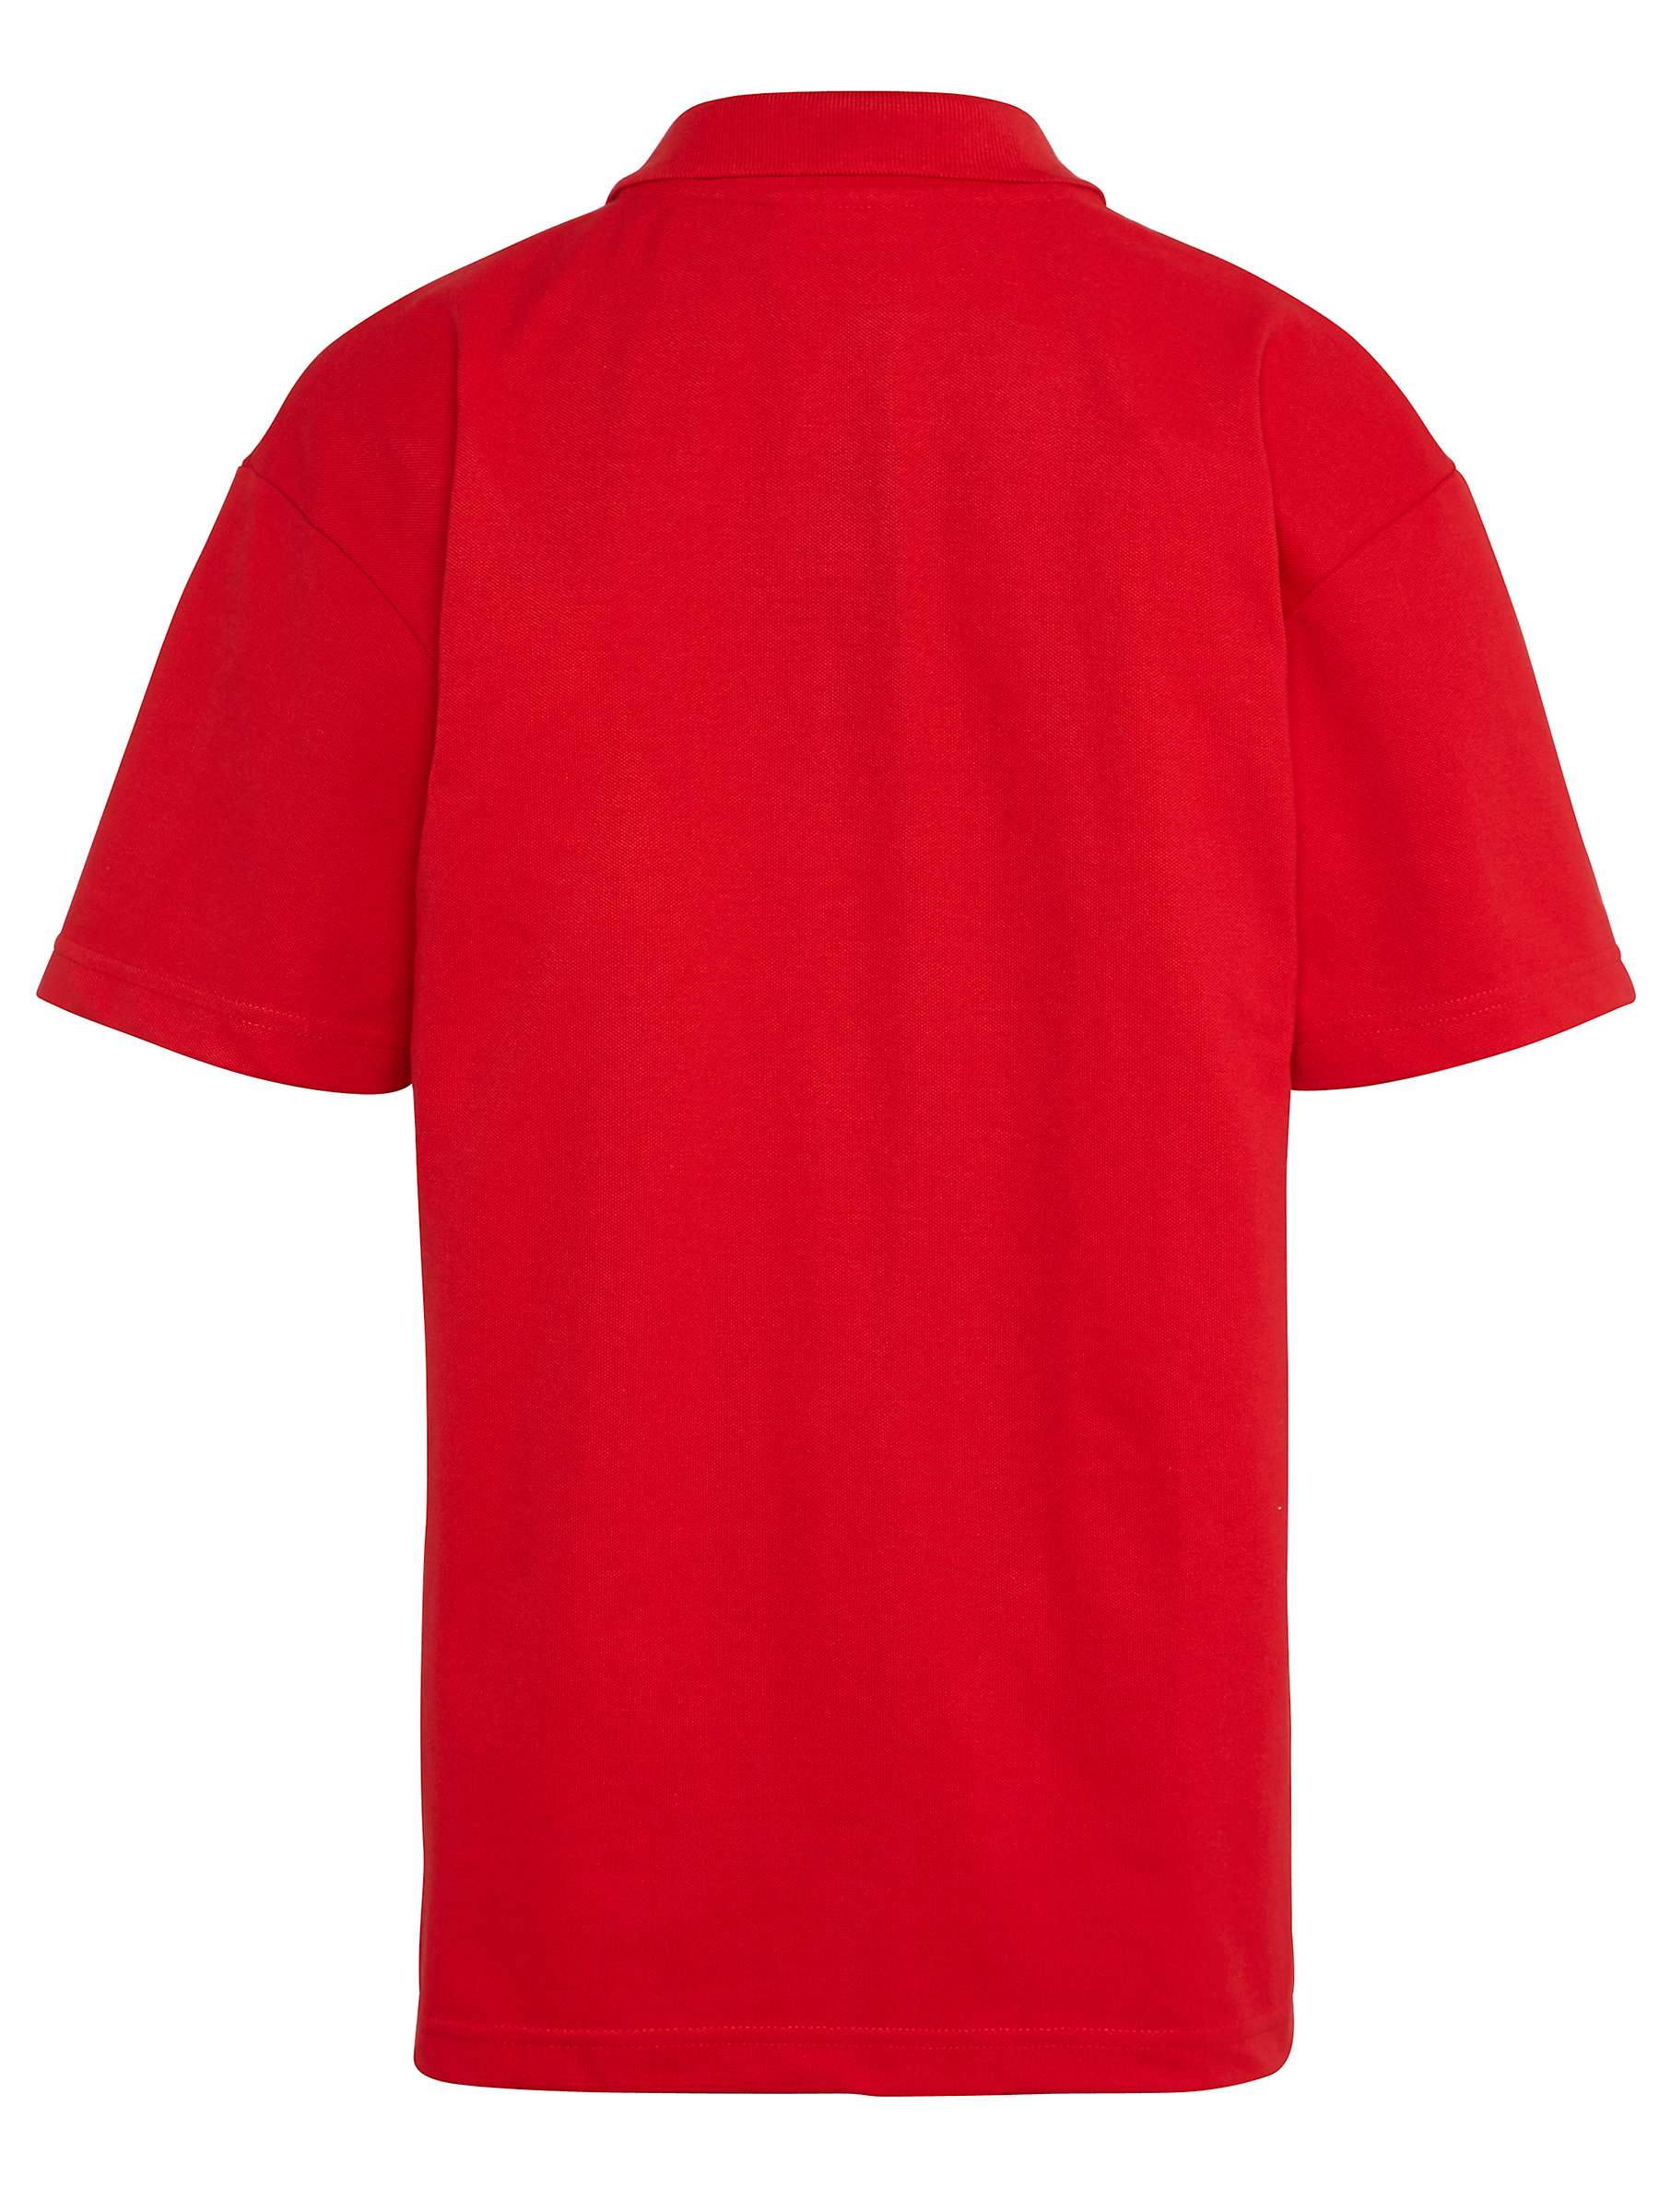 Buy Brondesbury College Boys' Red House Polo Shirt, Red Online at johnlewis.com